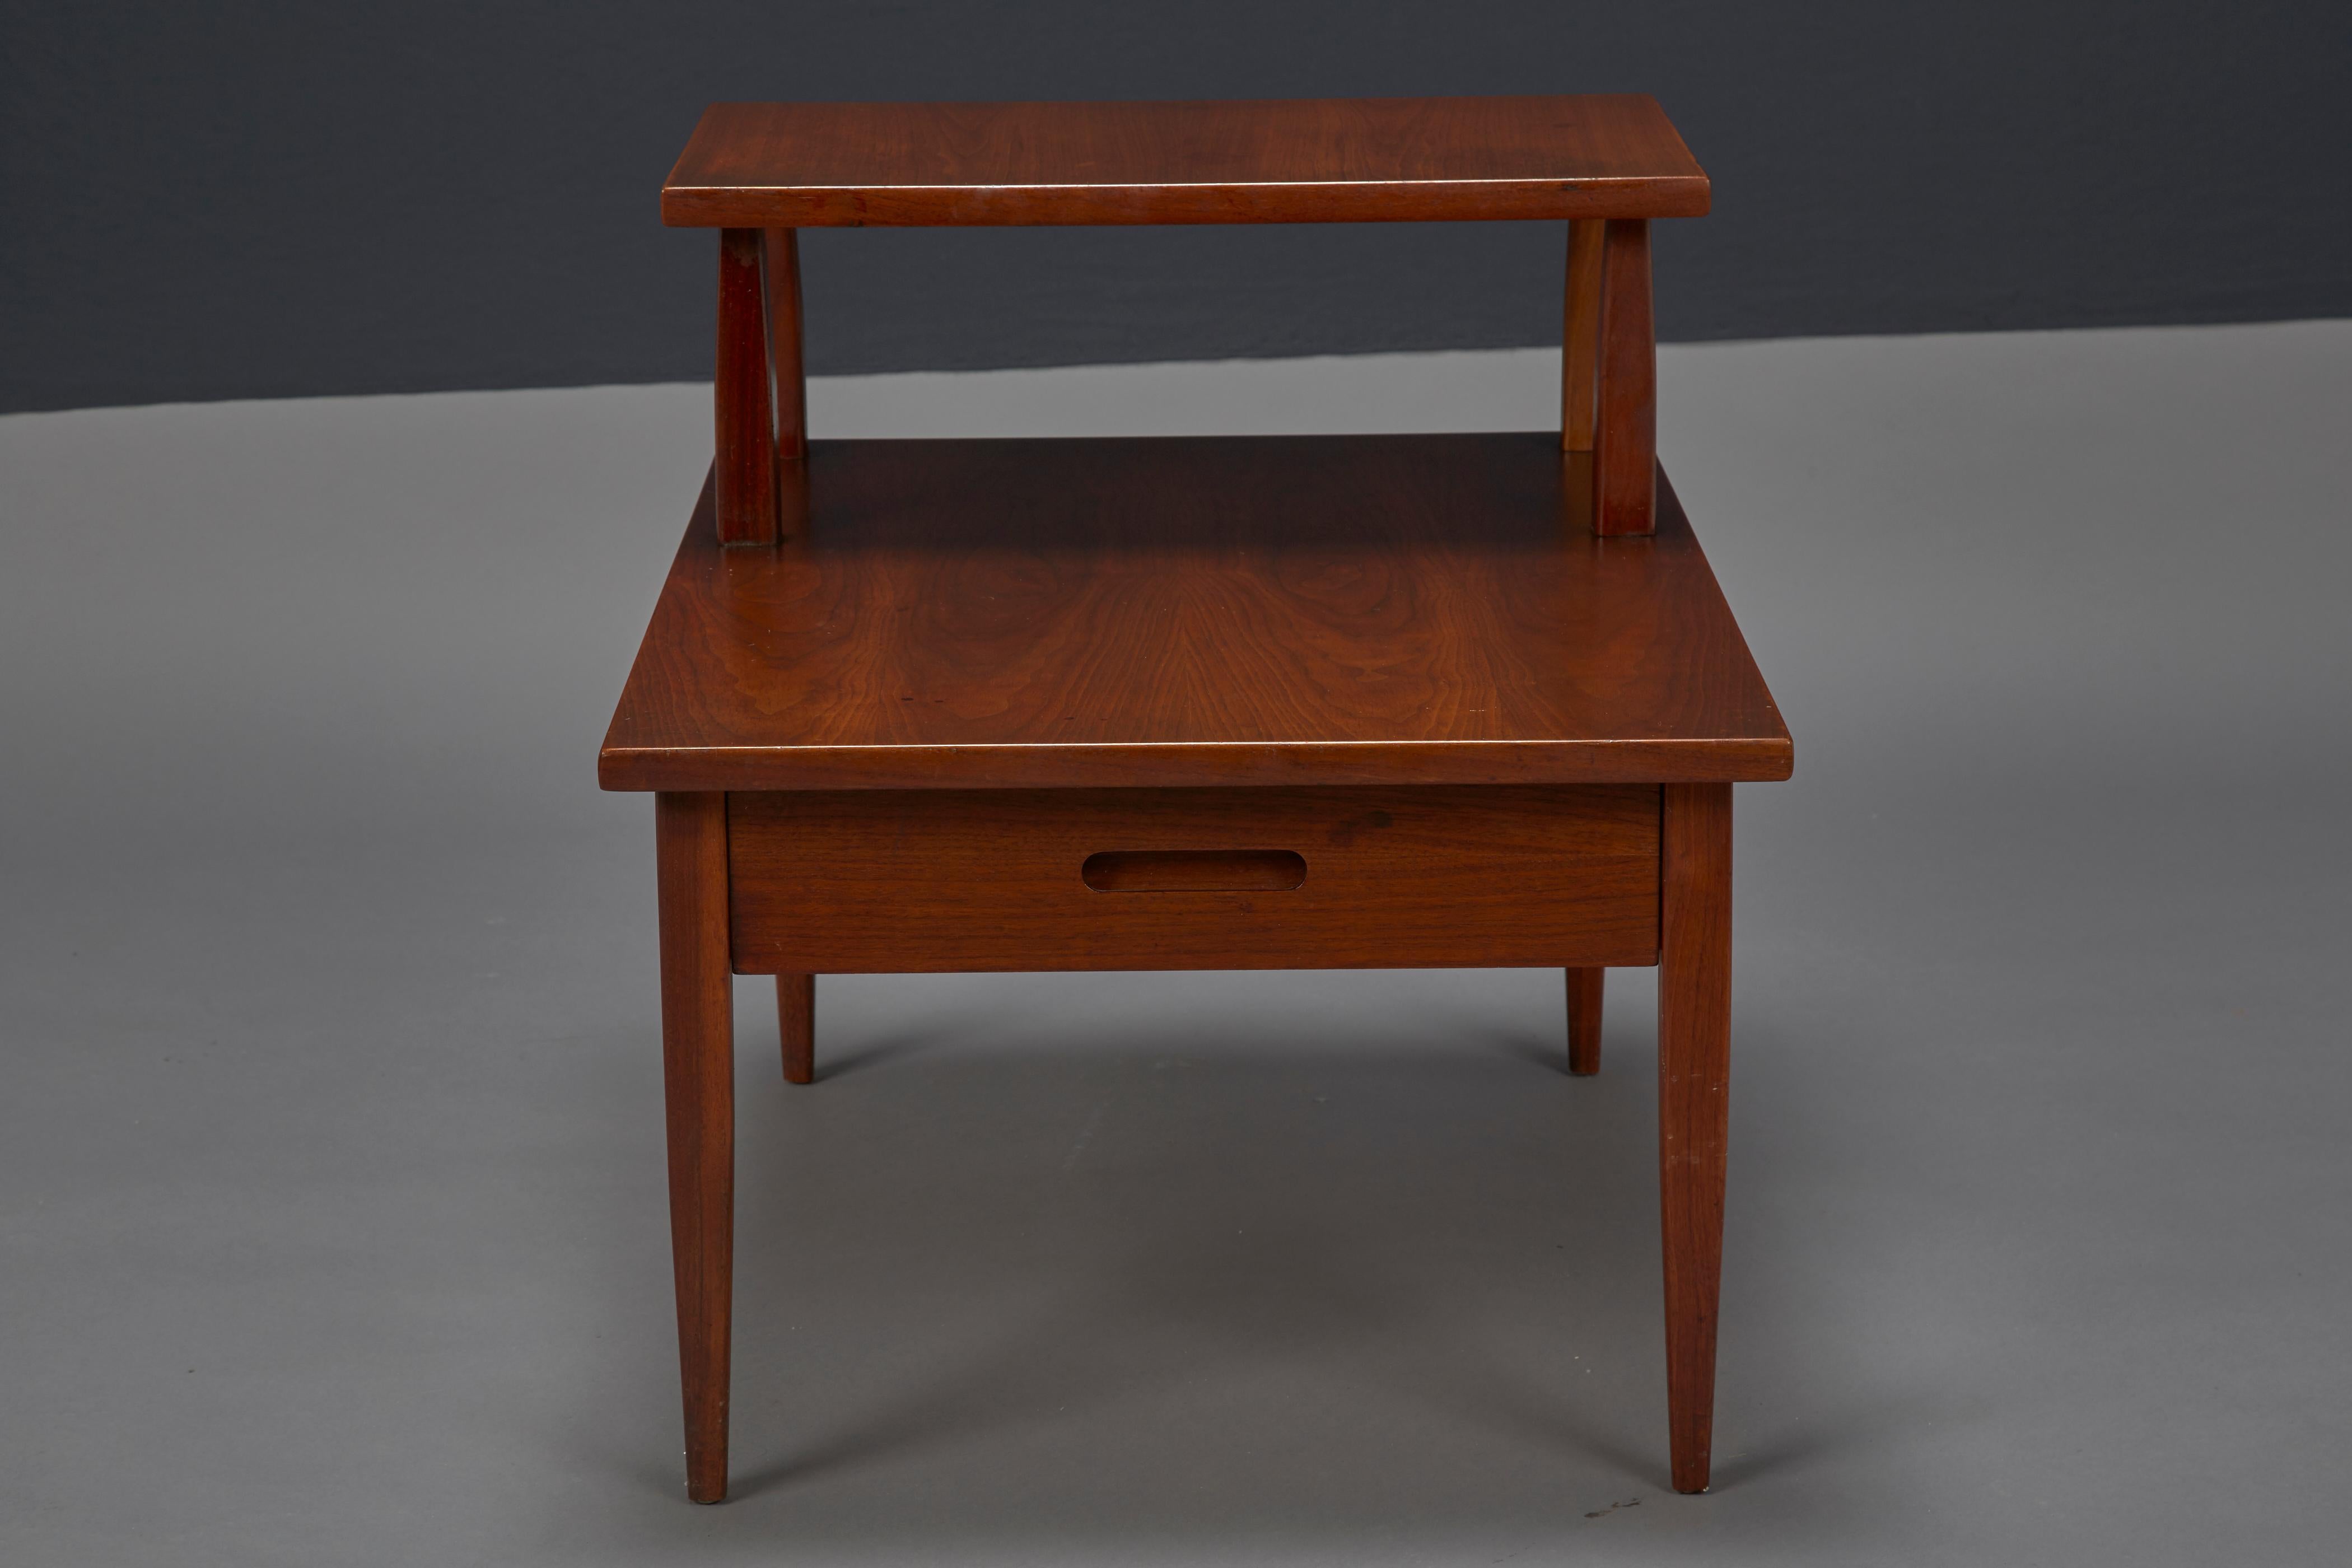 Mid-Century Modern walnut two-tiered side table attributed to T.H. Robsjohn-Gibbings for Widdicomb.